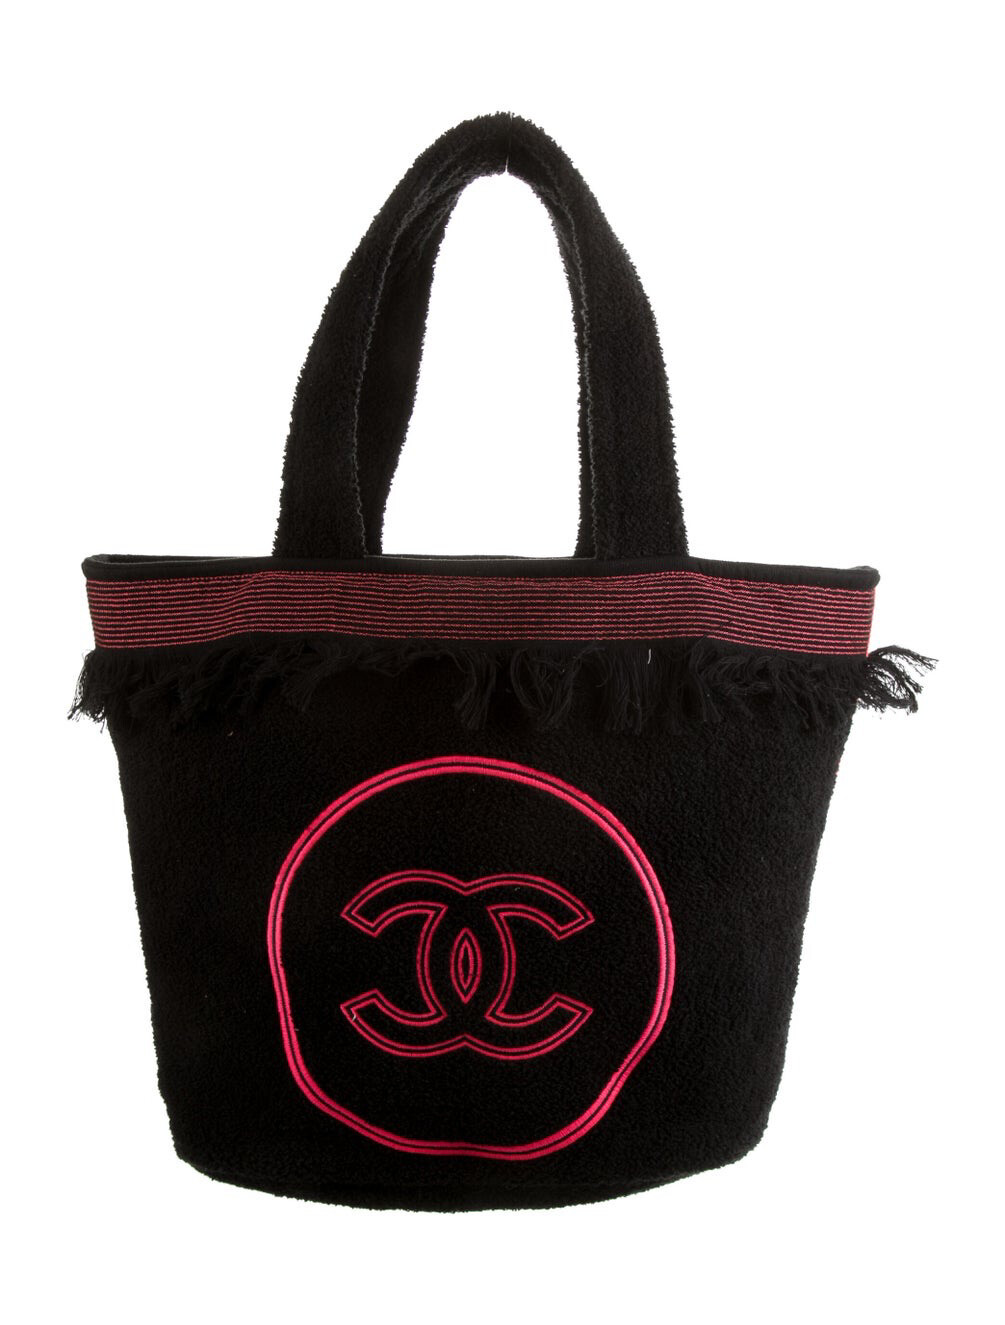 Chanel Towel Bag Black with Neon Pink, with Pouch and Towel, New MA001 -  Julia Rose Boston